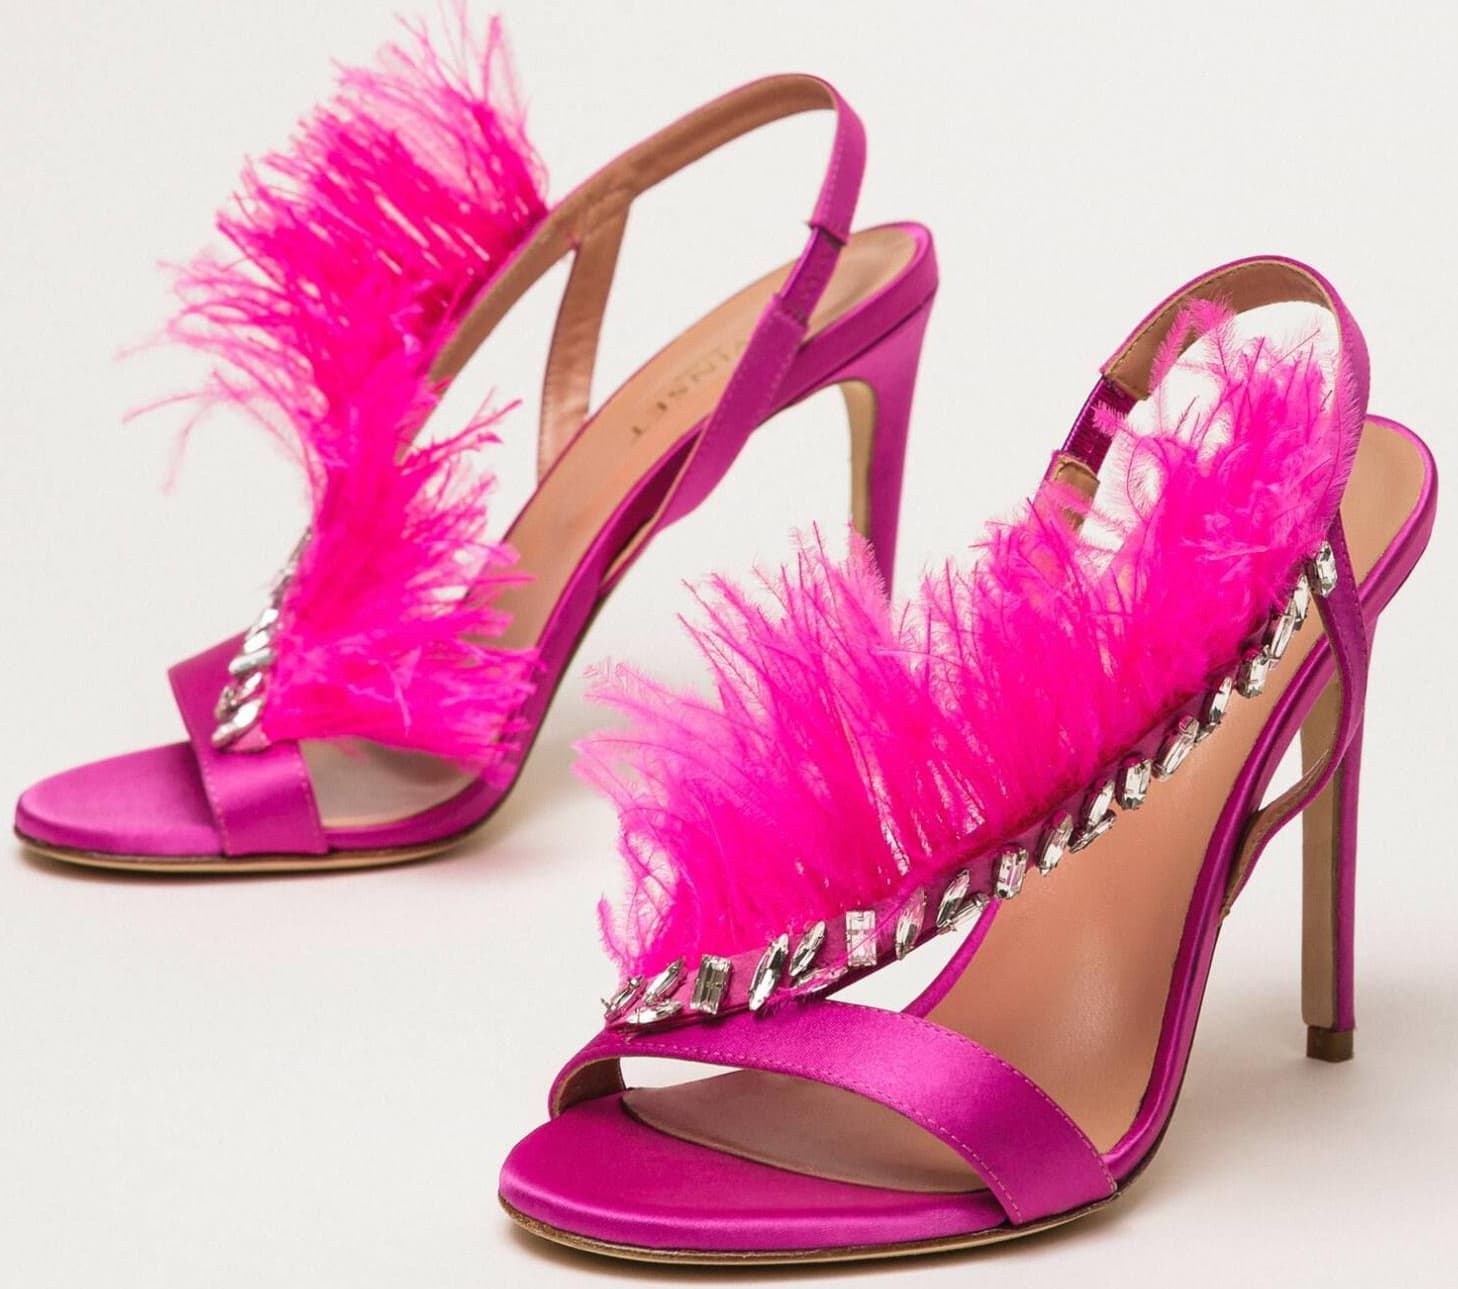 Pink satin Twinset sandals with feathers, ankle strap, and leather sole